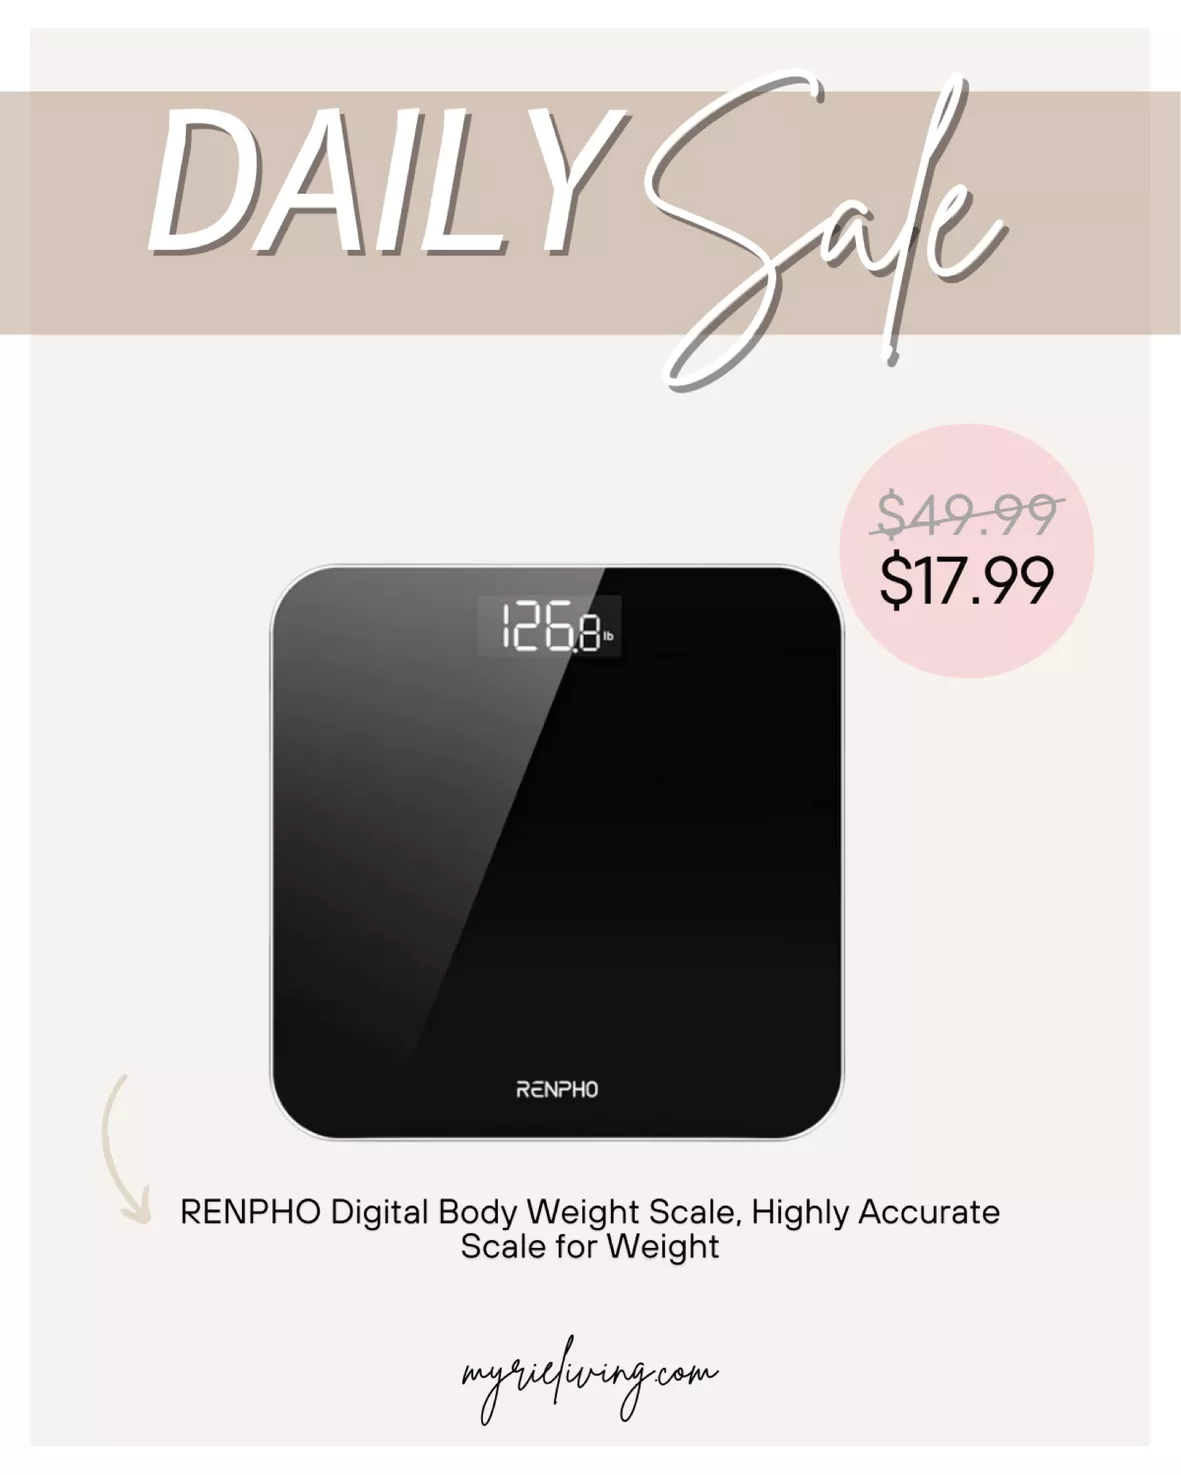 RENPHO Digital Body Weight Scale, Highly Accurate Scale for